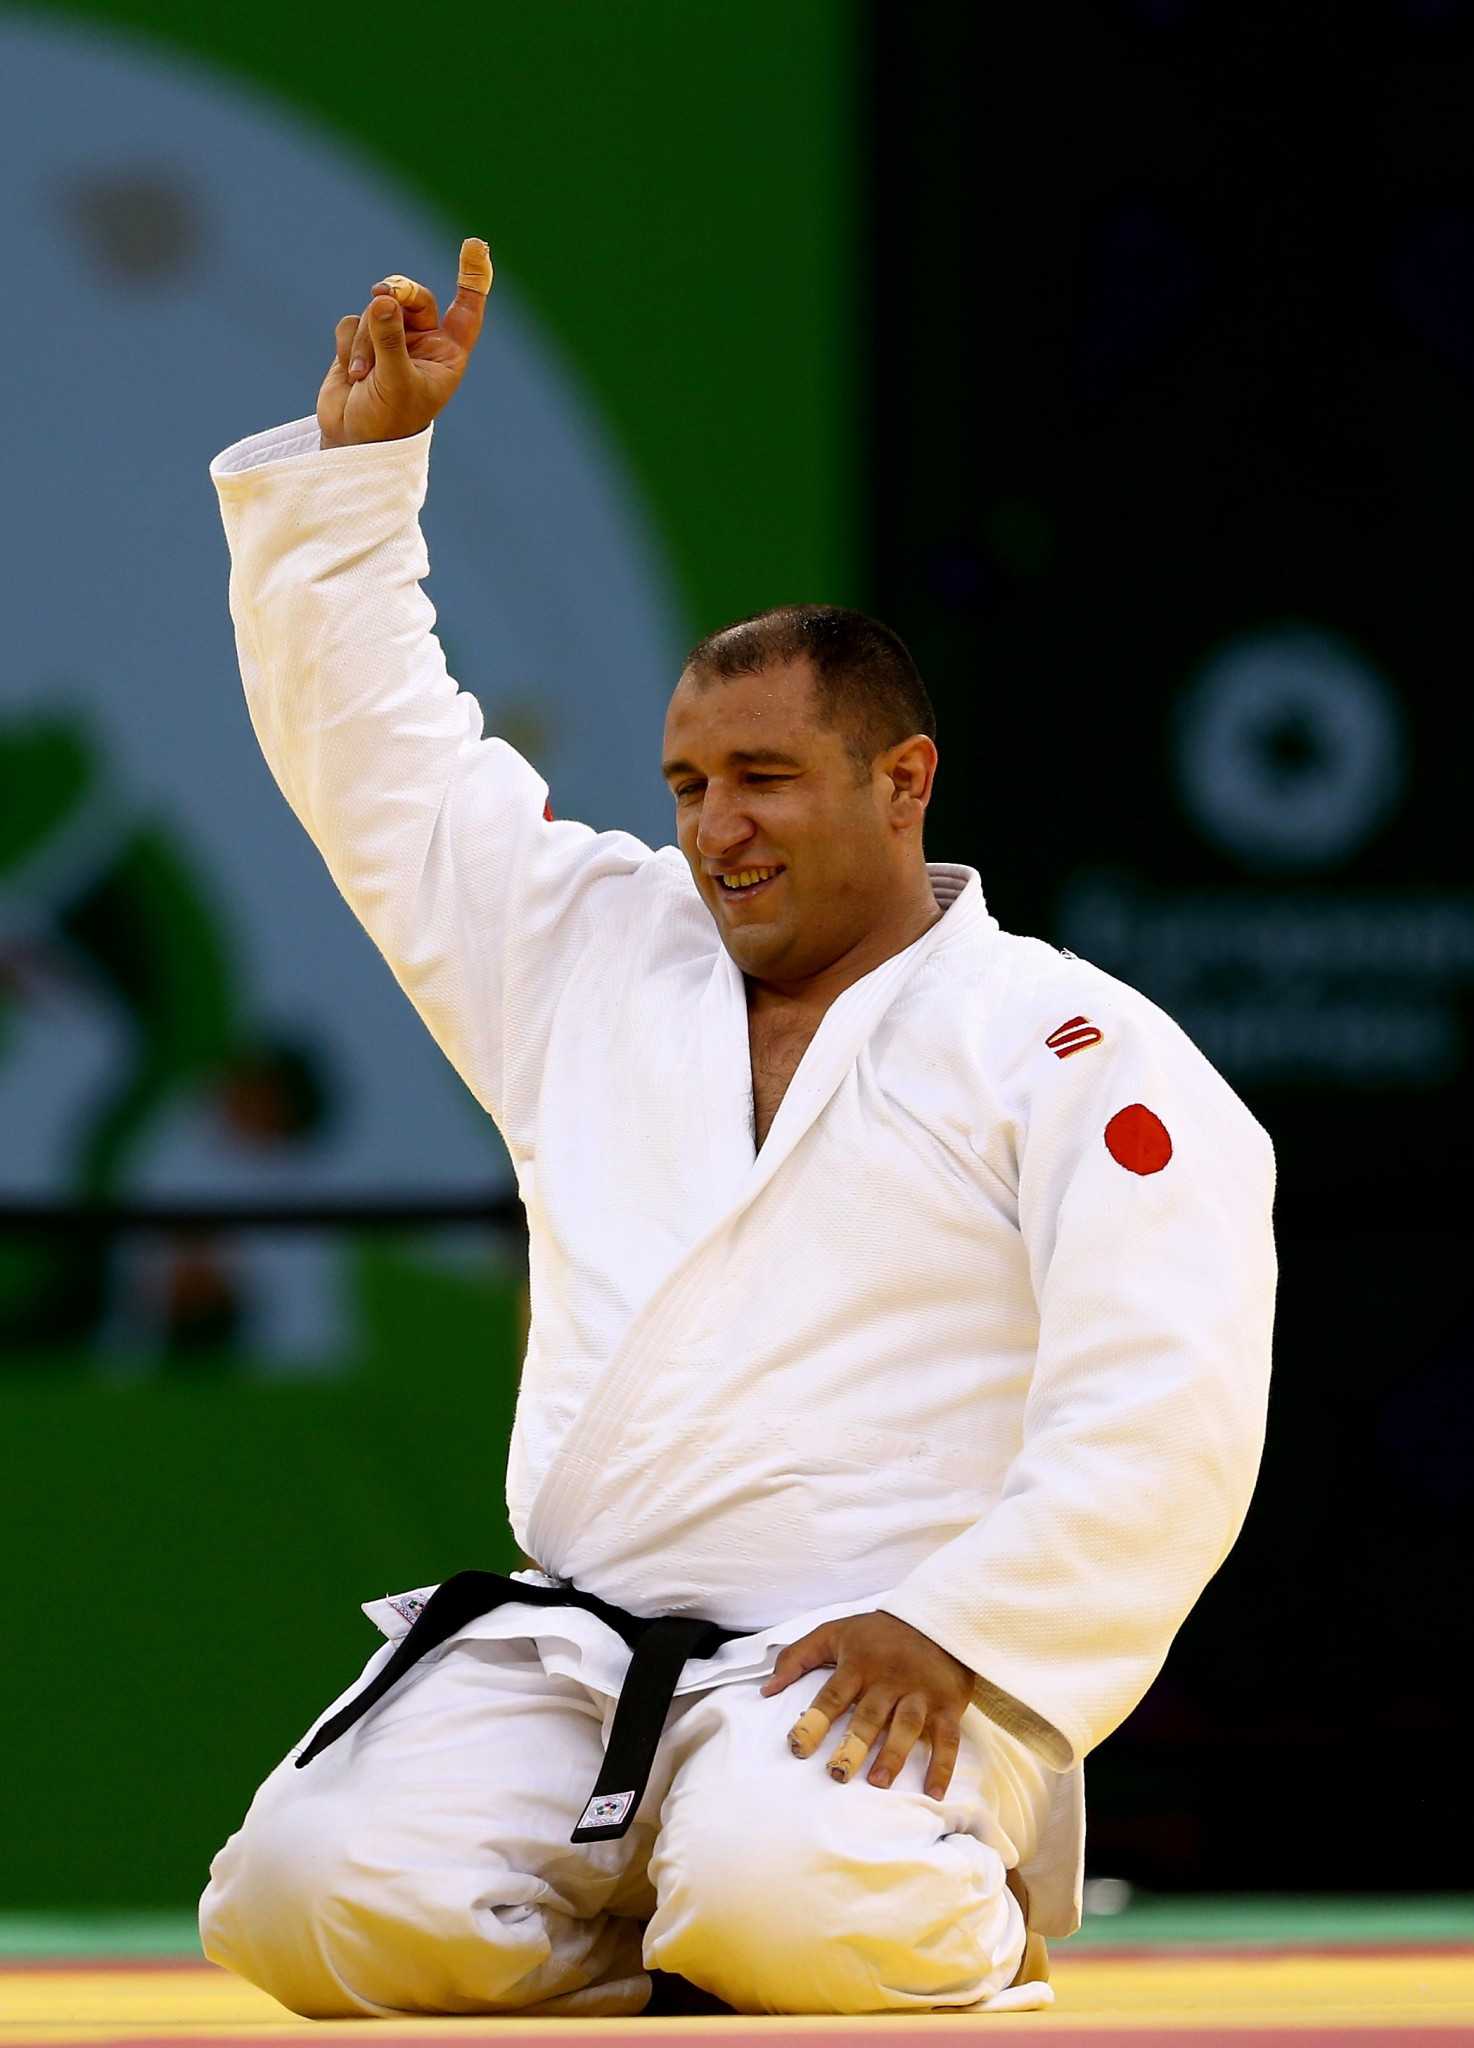 Ilham Zakiyev won a seventh consecutive European gold medal today ©Getty Images